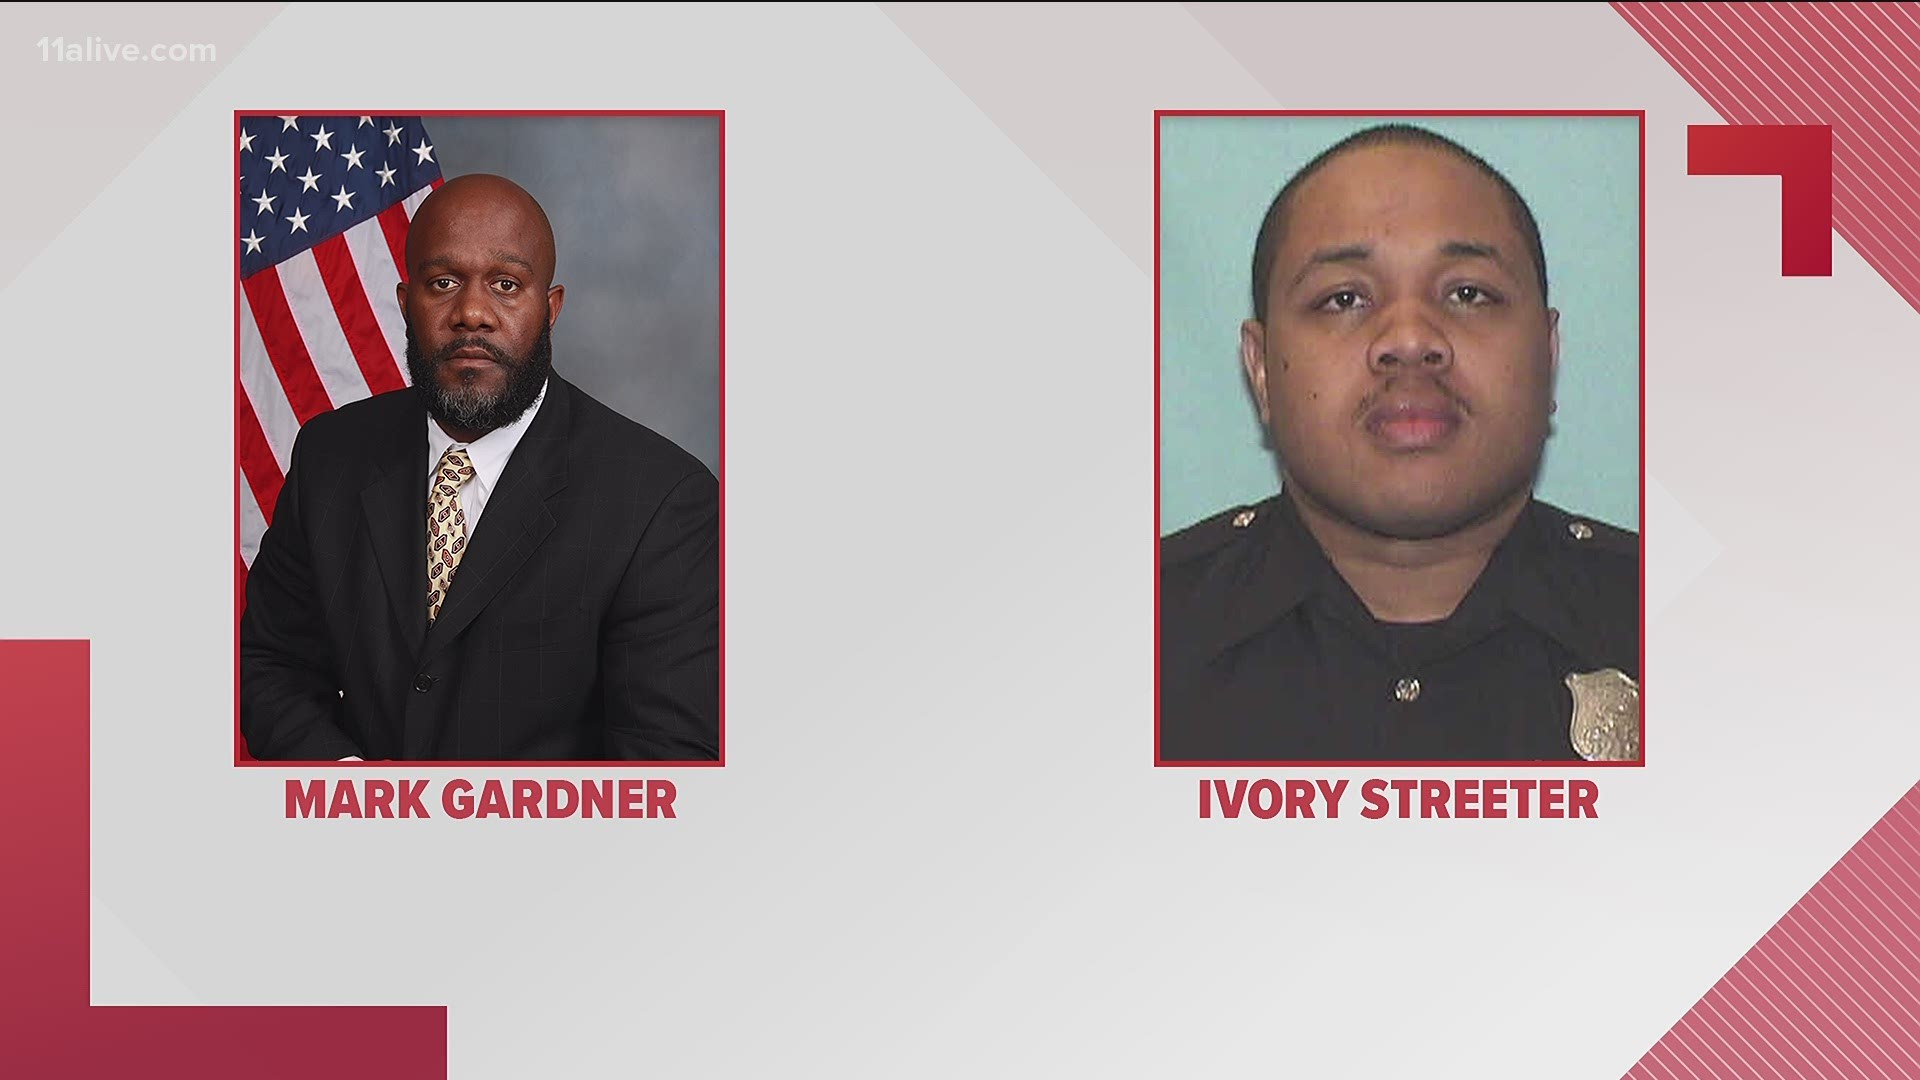 Both officers were fired after the mayor and police chief reviewed these videos.